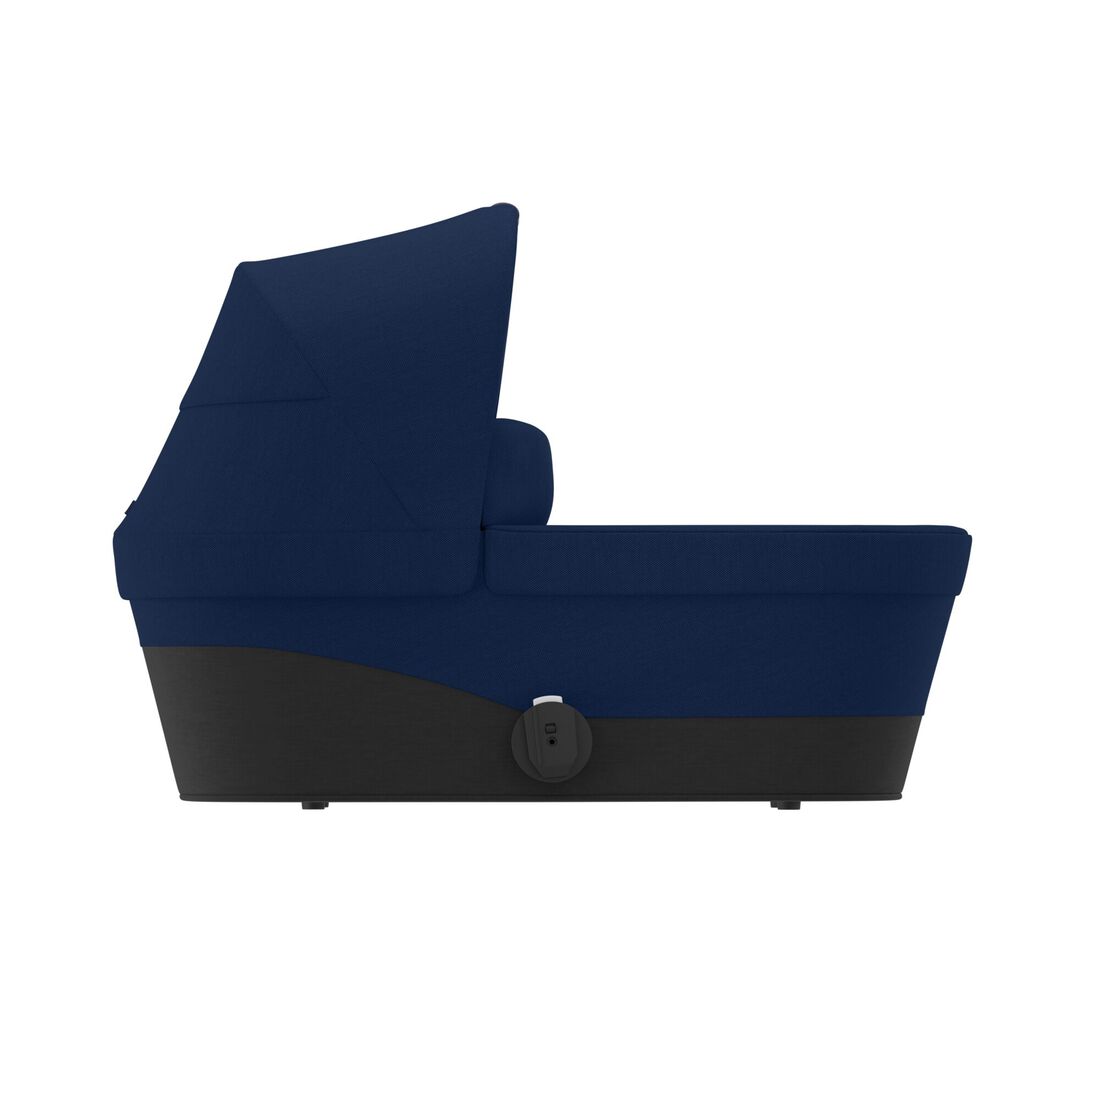 CYBEX Gazelle S Navicella Cot - Navy Blue in Navy Blue large numero immagine 3